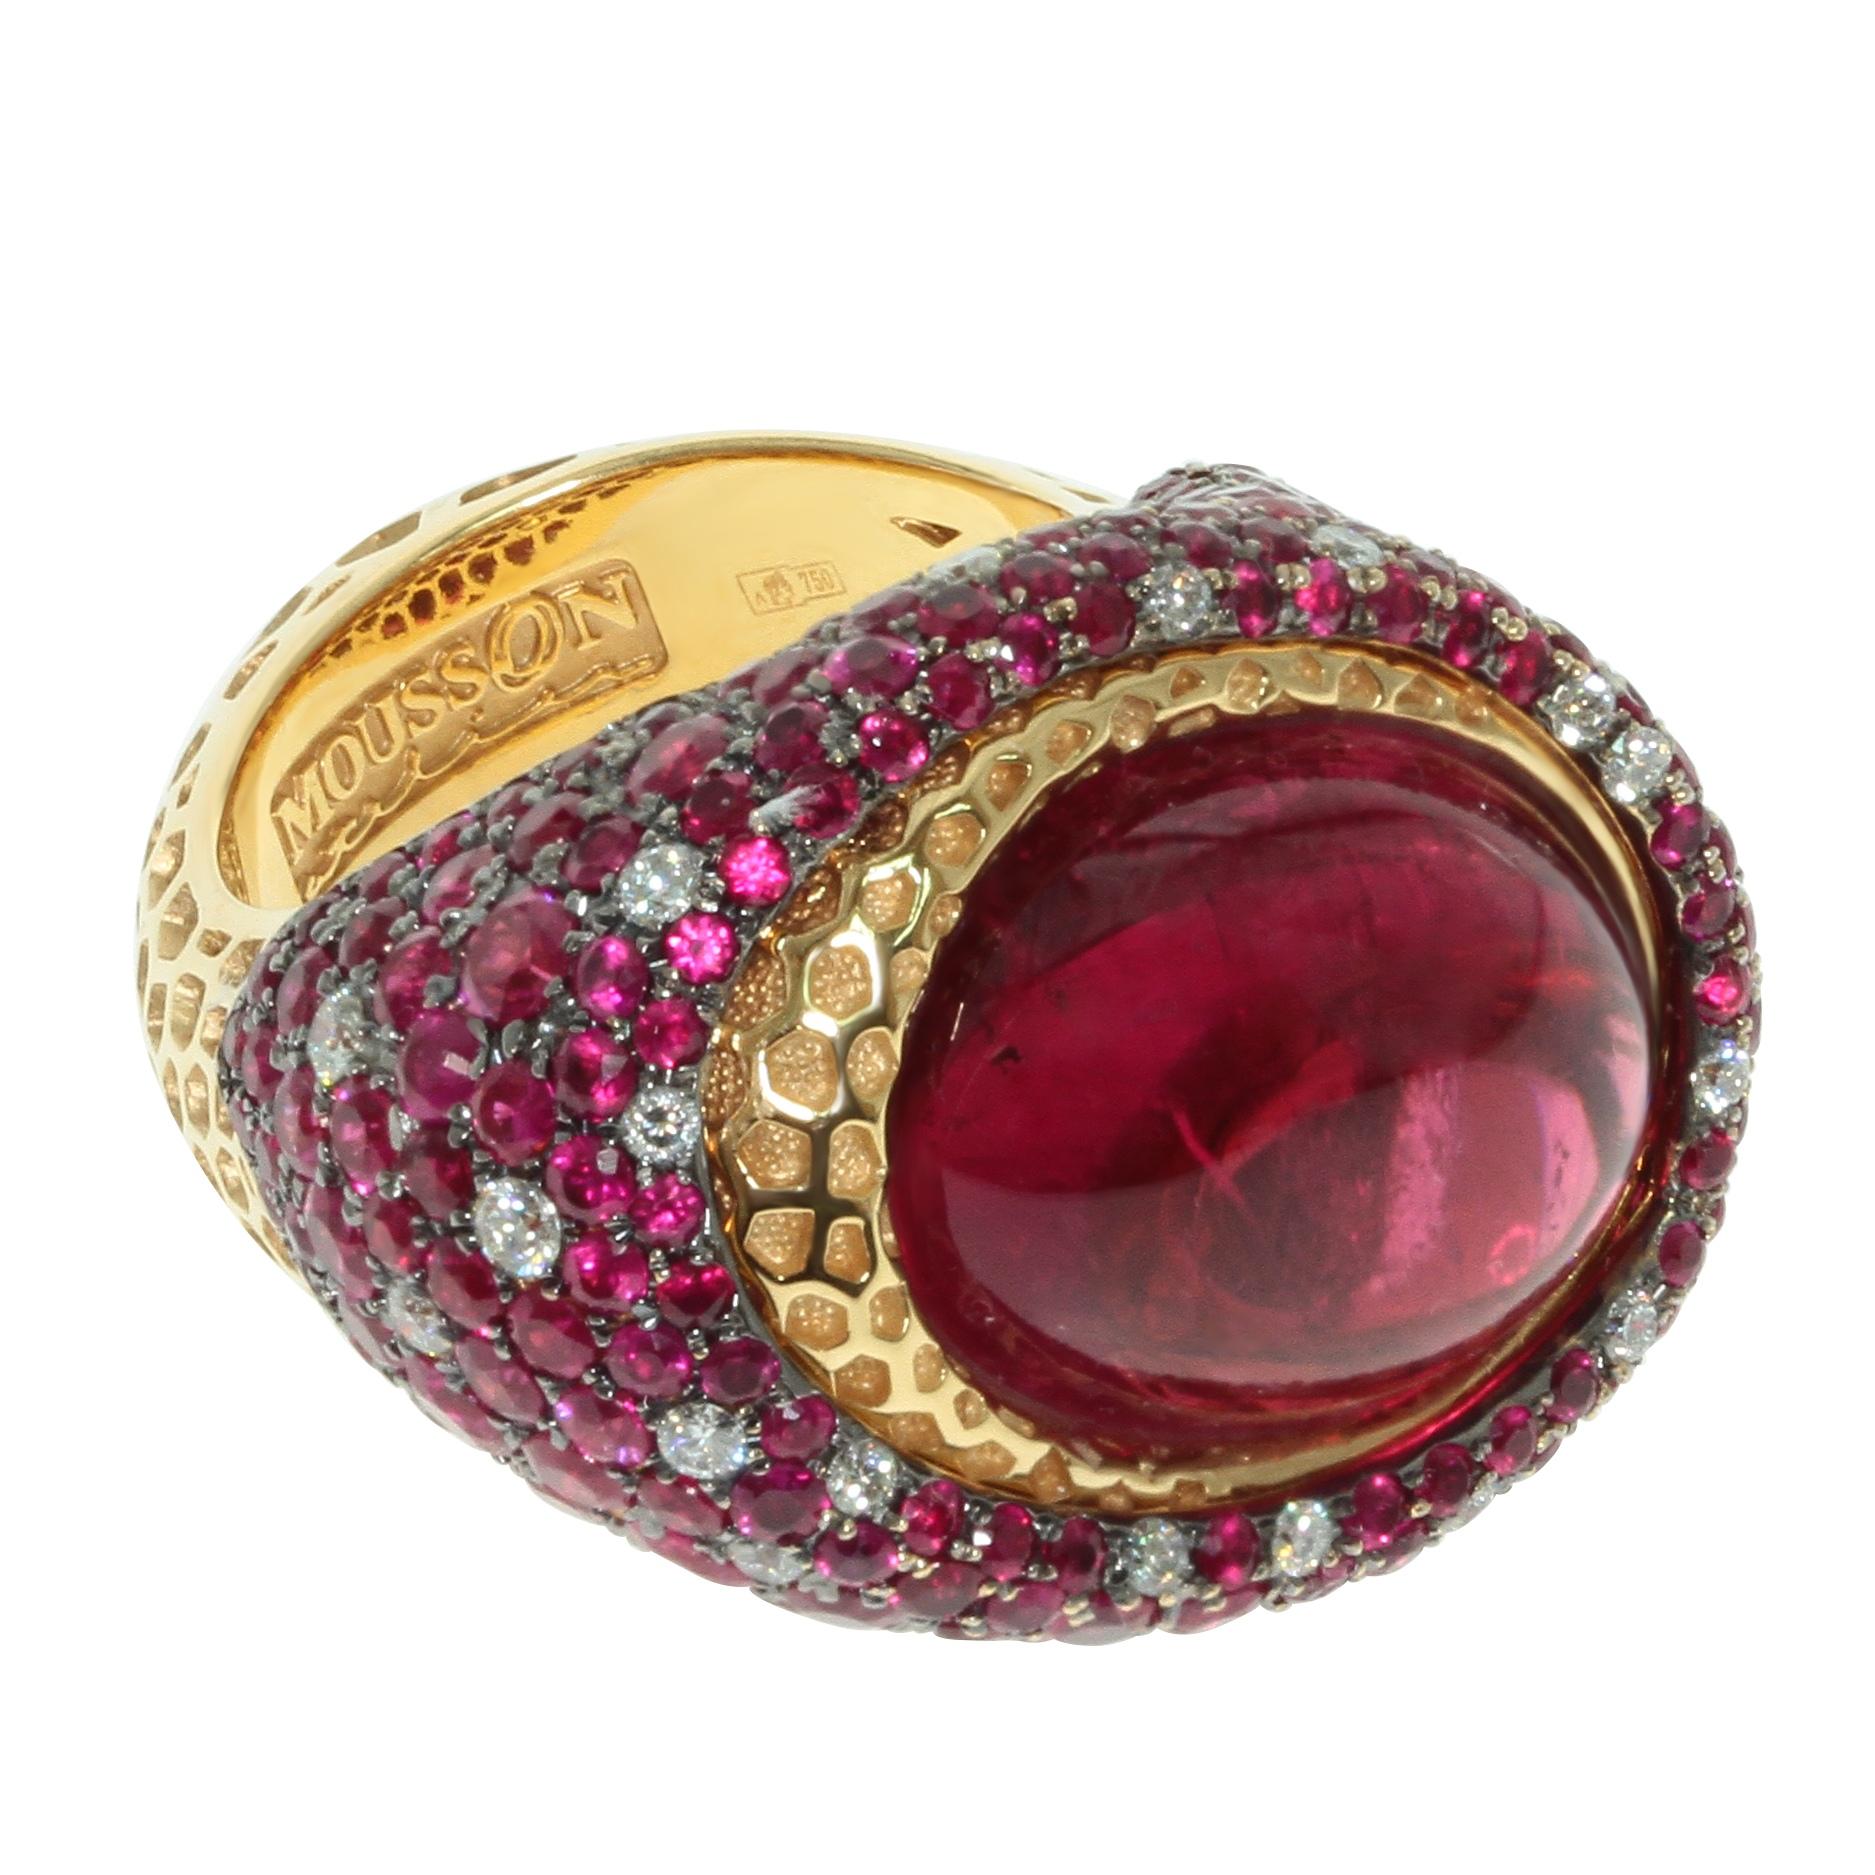 Rubellite Ruby Diamond 18 Karat Yellow Gold Honeycombs Ring
This ring is full of sweeteness!!! Yellow honeycombs meets with juicy raspberry confeture around appetizing cherry-rubellite lollypop. 
There is a lot of important things in this ring!